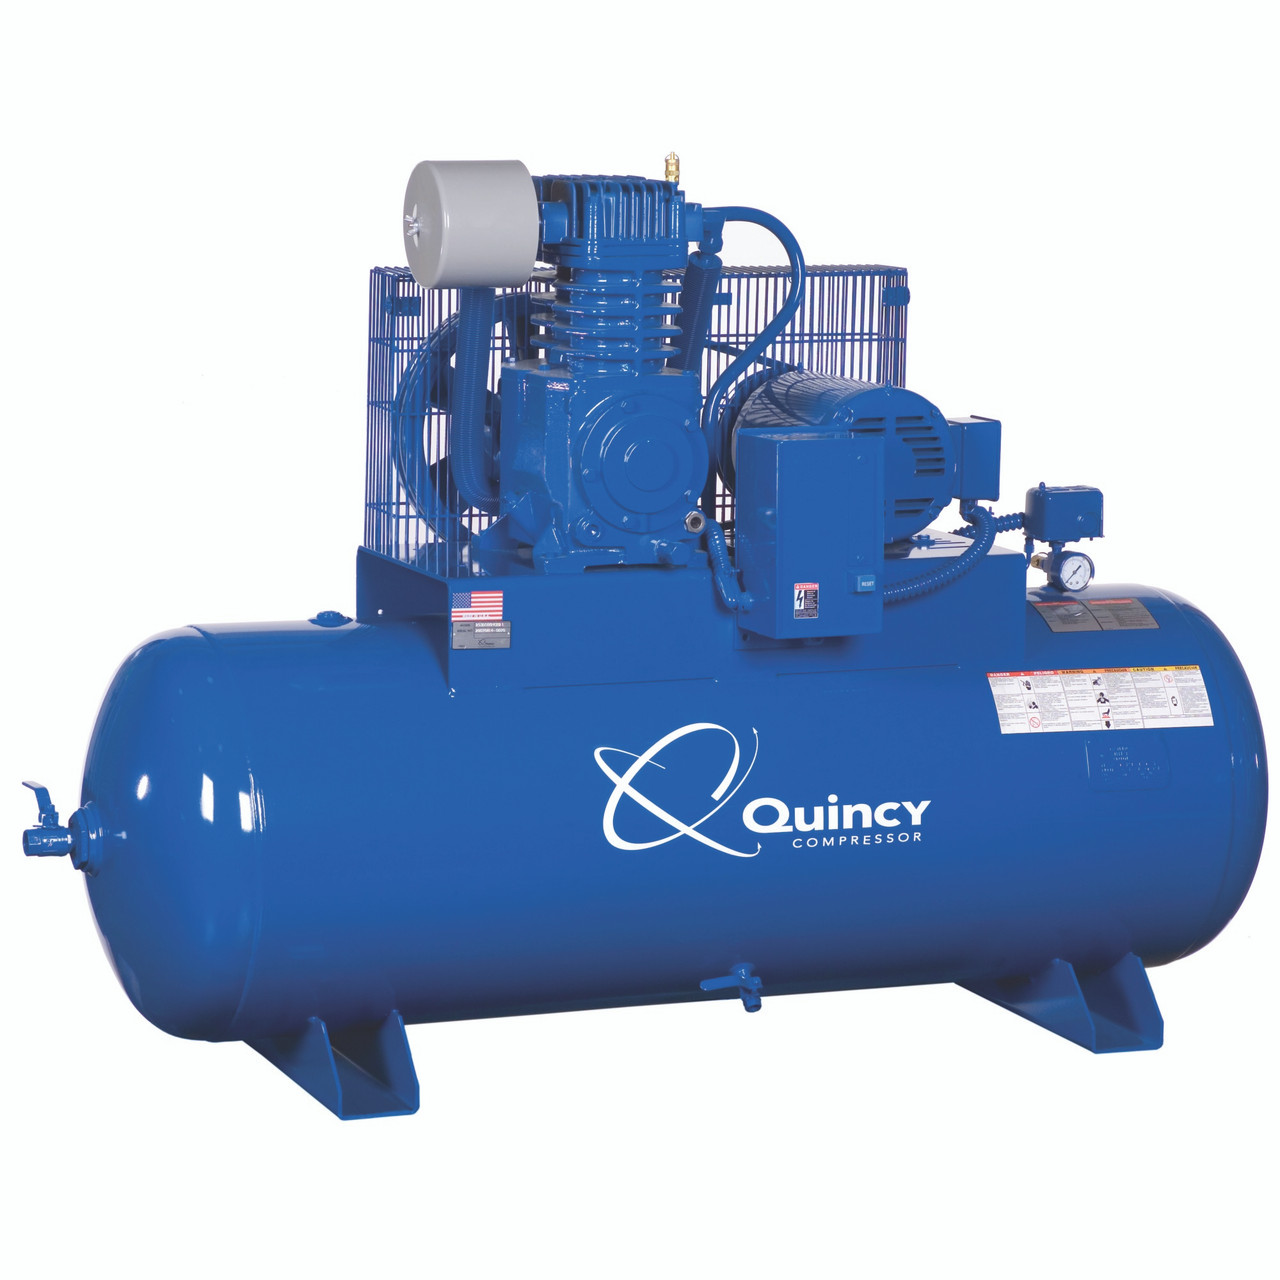 Quincy QP 353CS80HCB20 5 HP PRO, 200 Volt Three Phase, Two Stage, 80 Gallon Horizontal Air Compressor